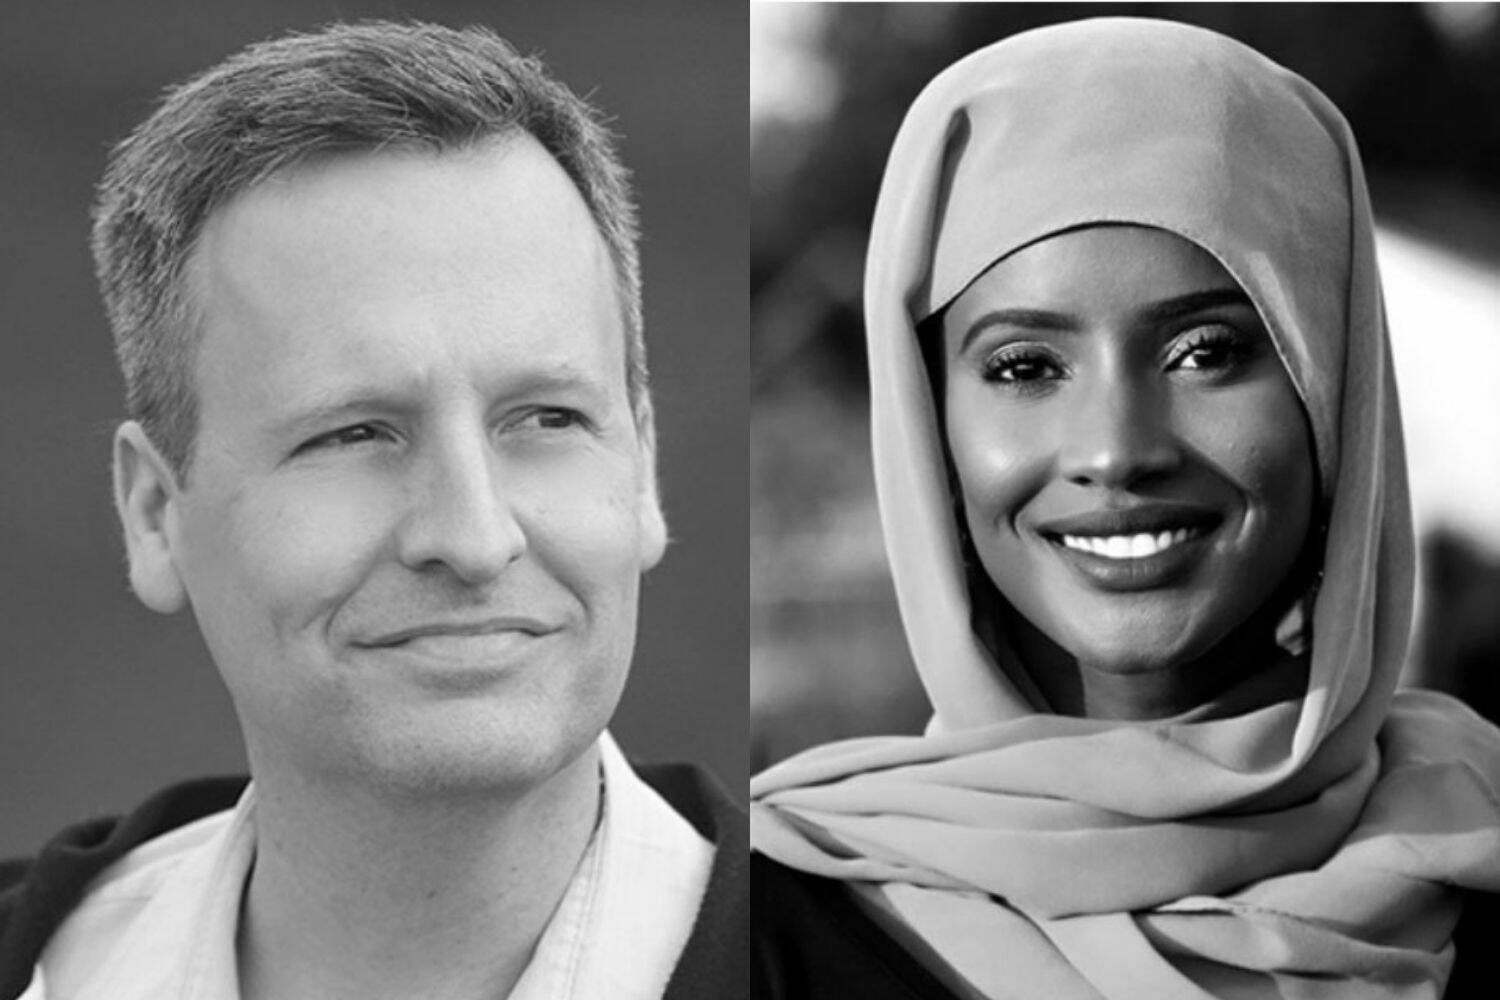 Left: Dave Upthegrove, right: Shukri Olow (screenshot from King County website)